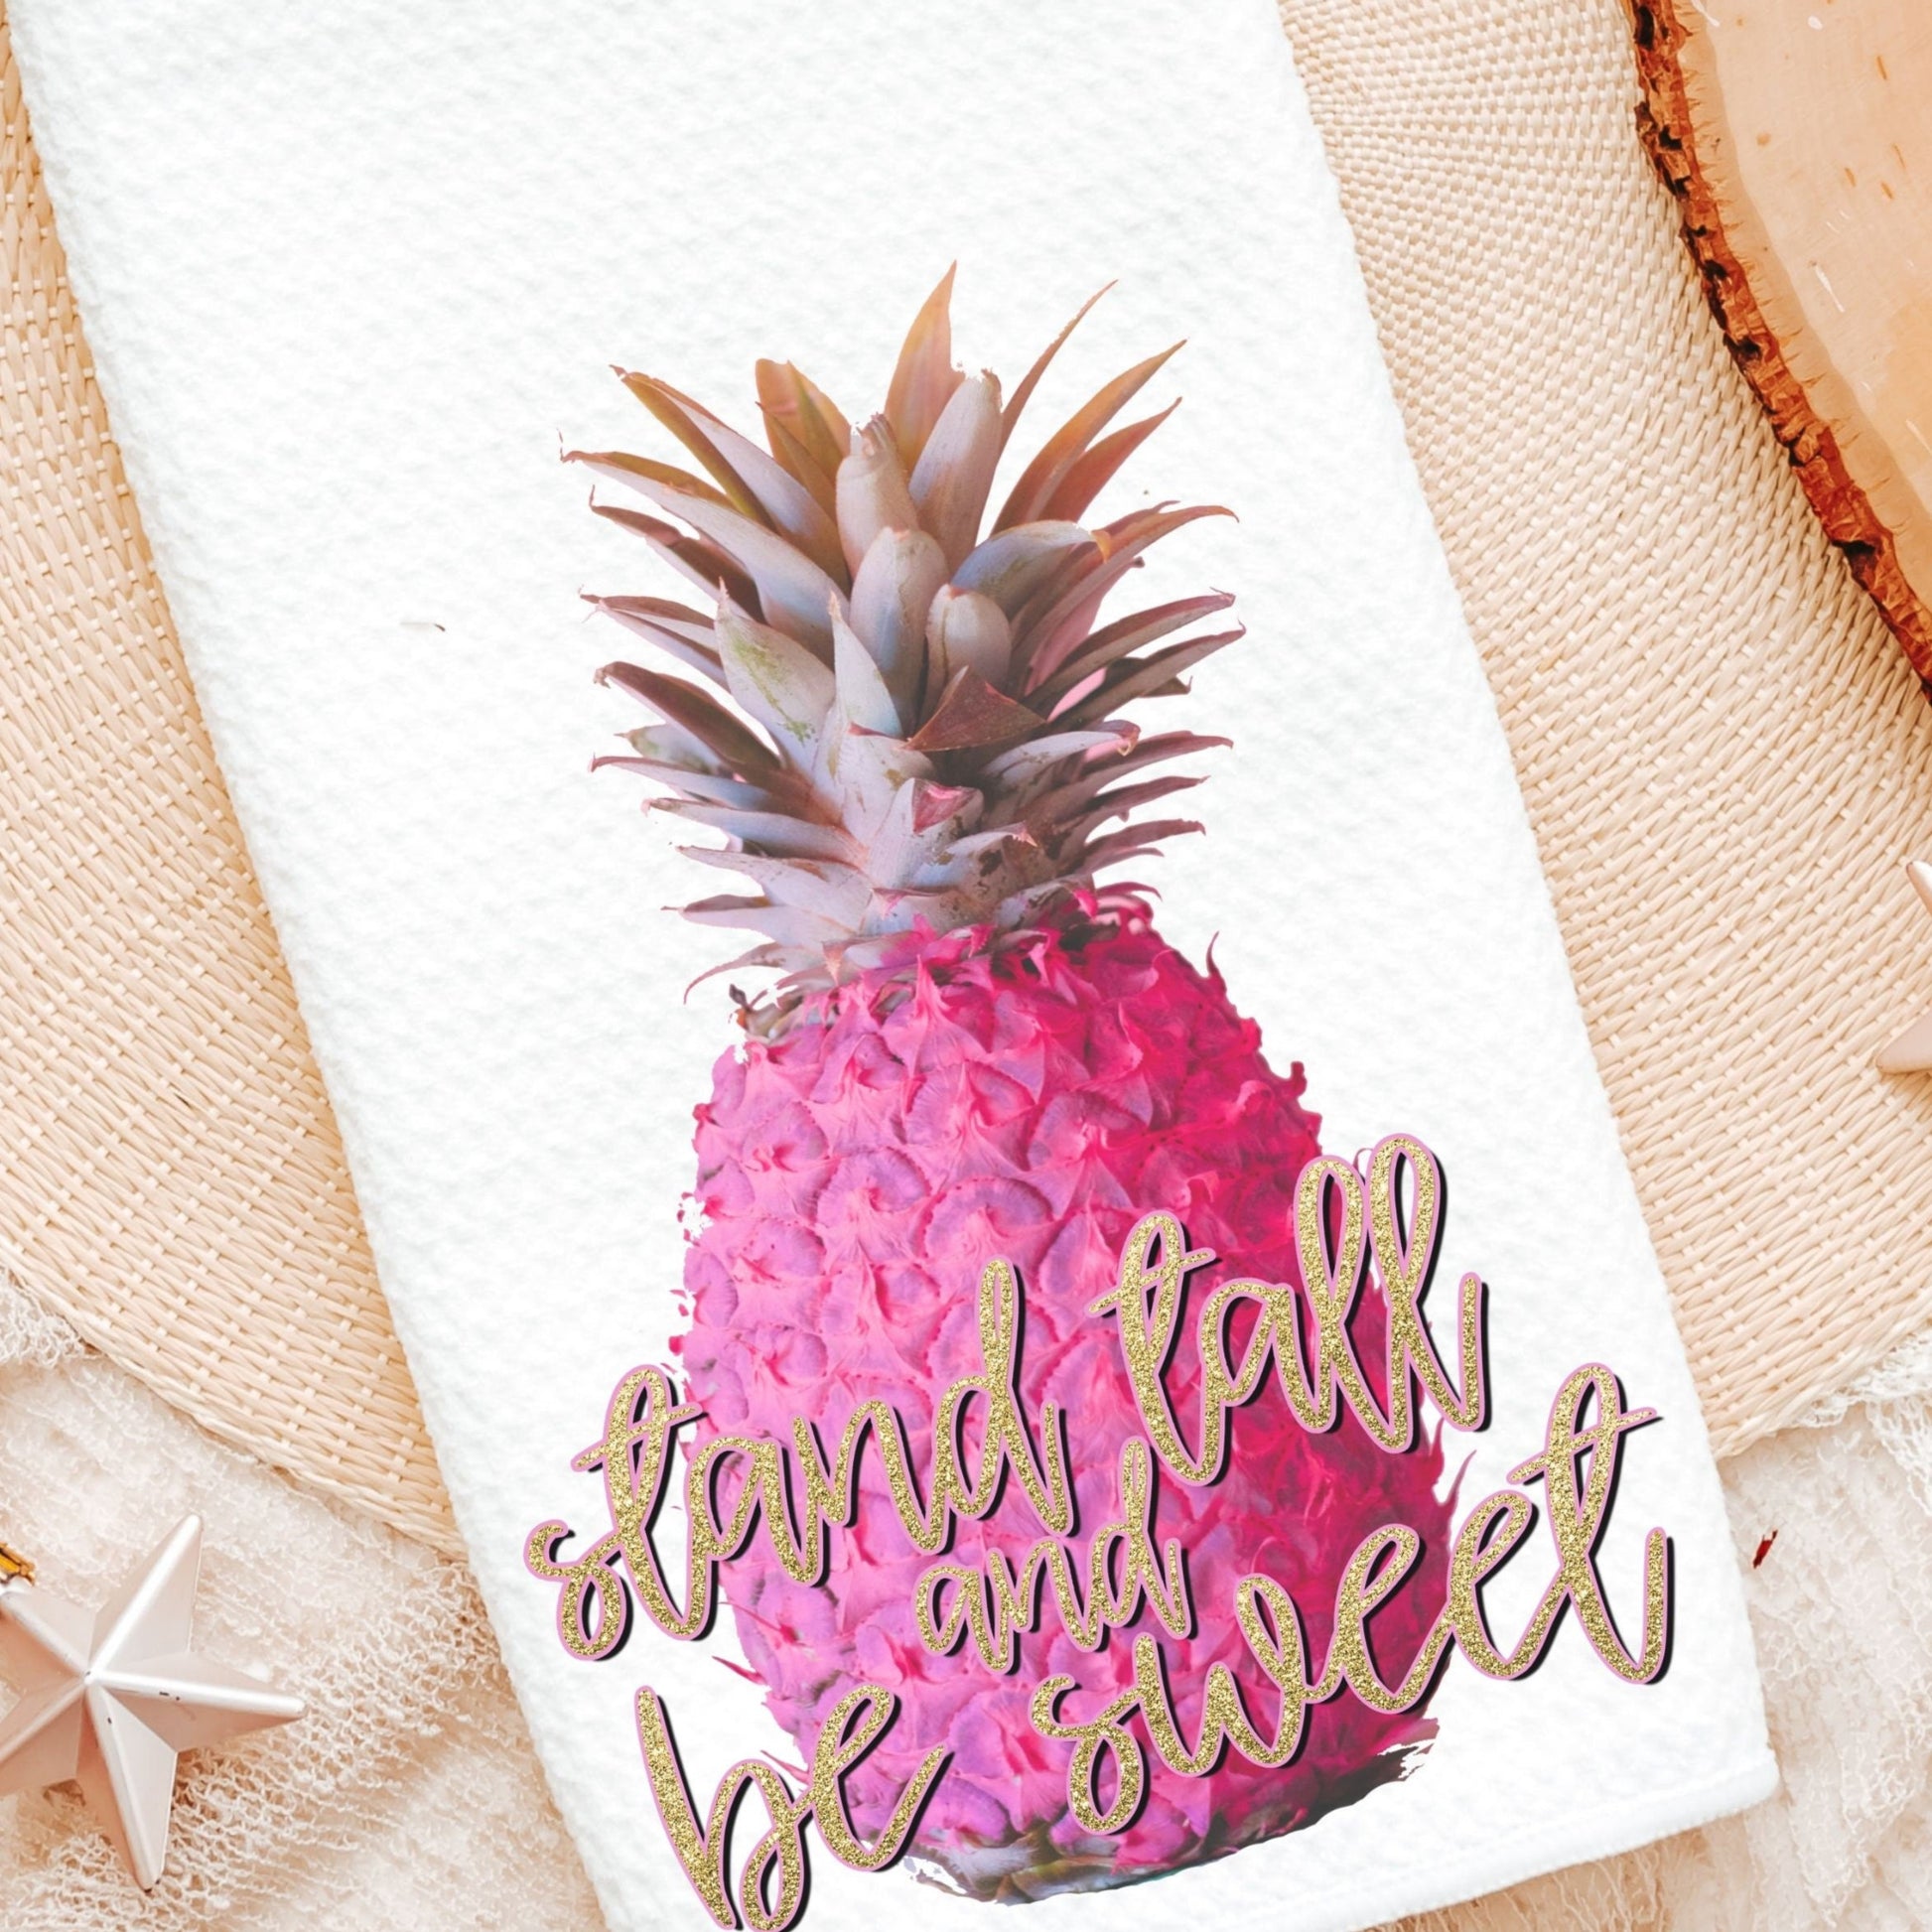 Stand tall and be sweet pink pineapple towel